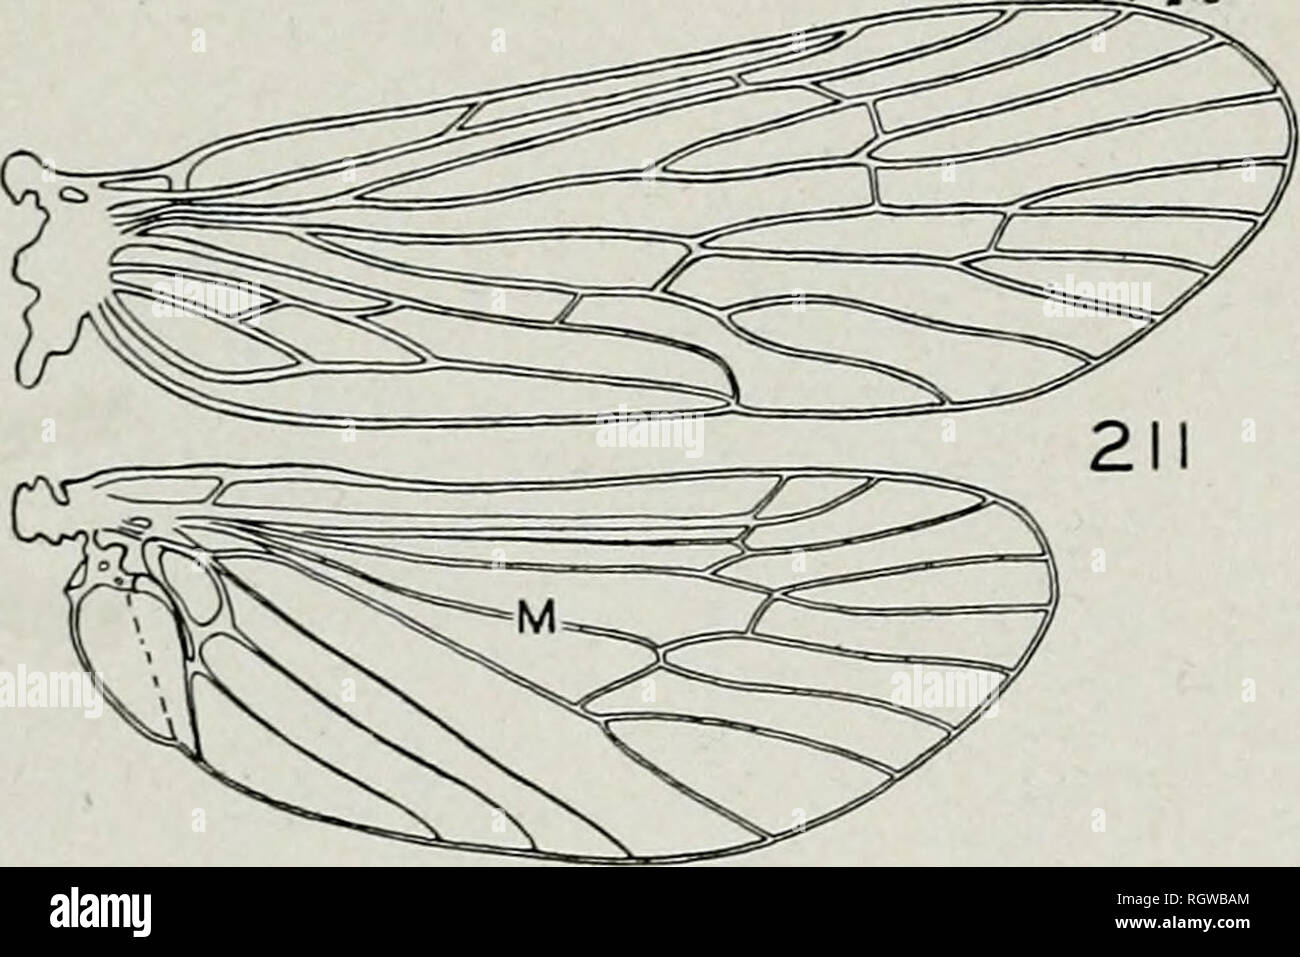 . Bulletin. Natural history; Natural history. Bl'3. Fig. 208.—Phylocentropus placidus, front wing. Fig. 209.—Neureclipsis crepuscularis, front and hind wings. absent or branching from Ra near margin of wing, fig. 210 3 3. Hind wings with M 3-branched, fig. 209 Neureclipsis, p. 56 Hind wings with M 2-branched, fig. 211 4 4. Front or hind wings, or both, with Ra present, fig. 210. . Polycentropus, p. 58 Both wings with R2 absent, fig. 211... 5 215 216  „ 217 Fig. 214.—Cyrnellus marginalis, maxillary palpus. Fig. 215.—Nyctiophylax vestitus, maxillary palpus. Fig. 216.—Cernotina Oklahoma, maxillar Stock Photo